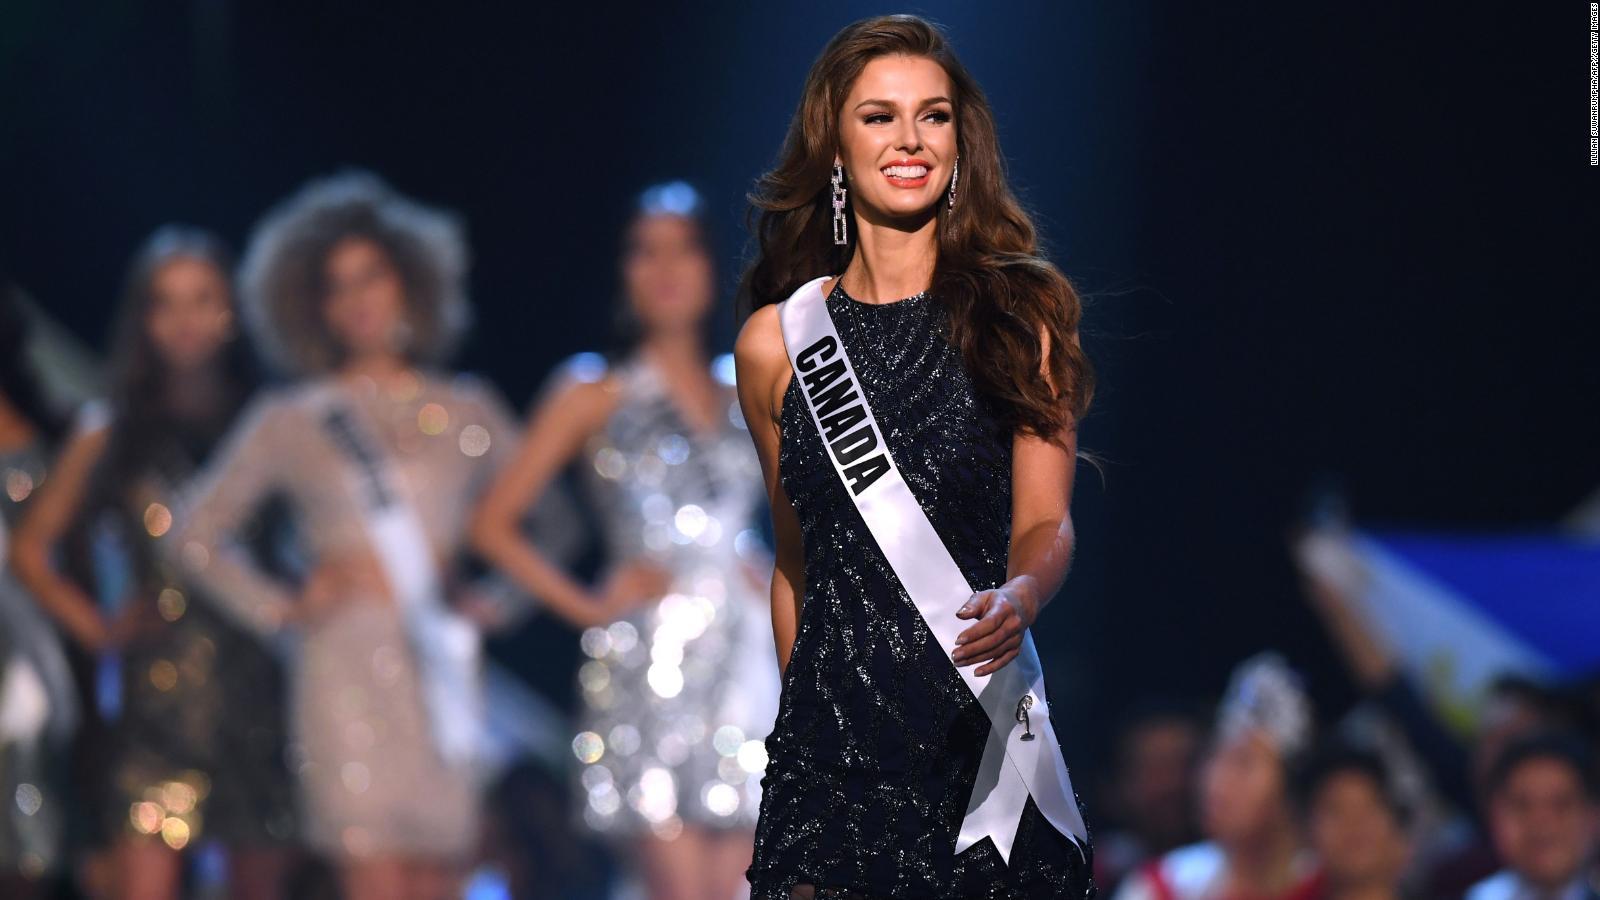 Miss Universe 2018: Catriona Gray, from the Philippines, claims